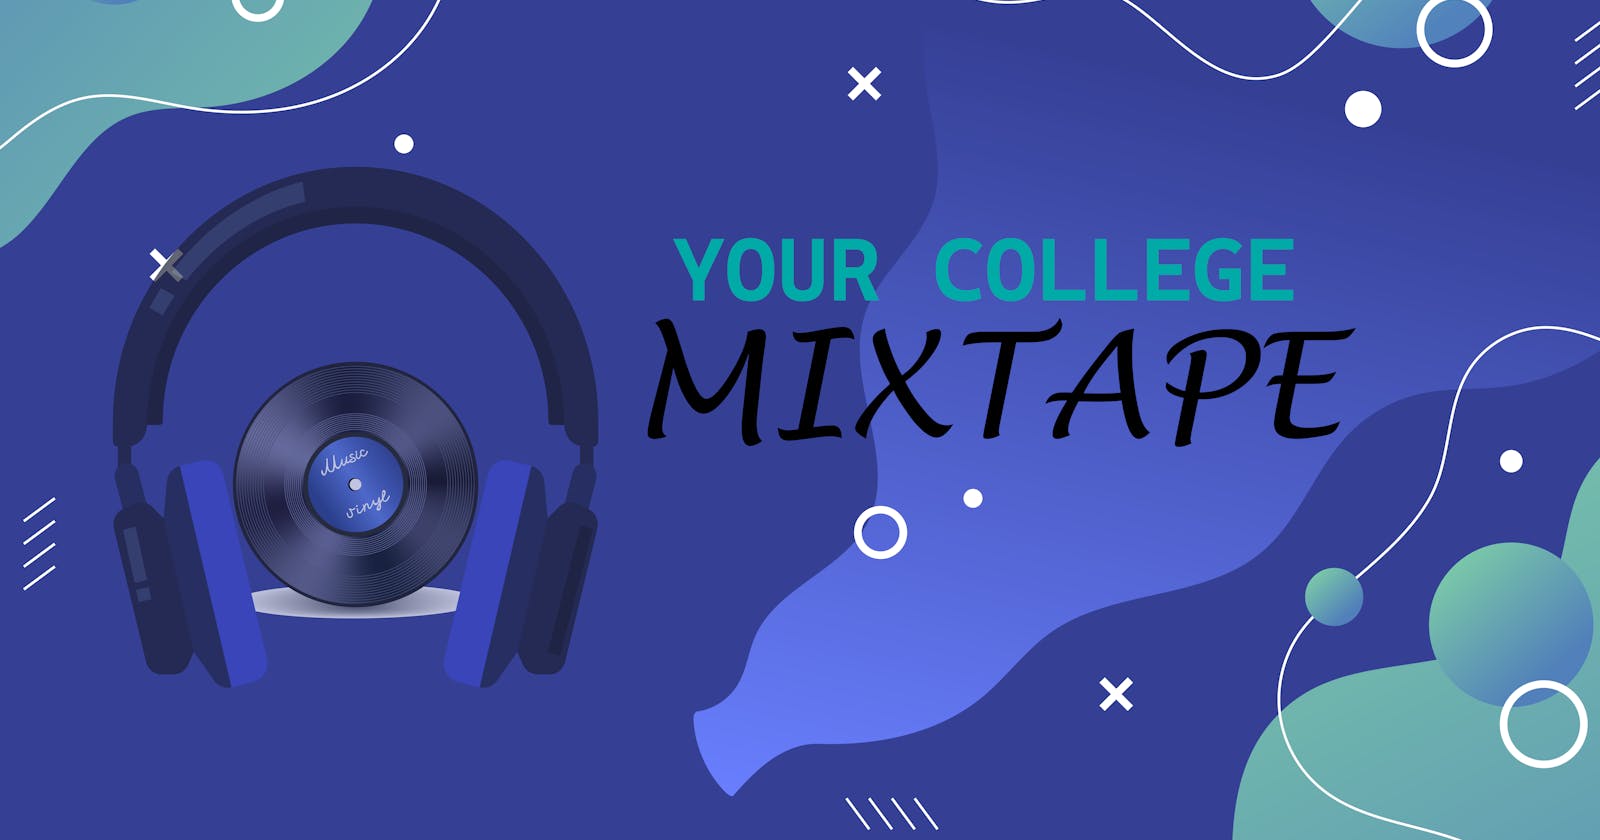 First Runner Up - Your College Mixtape